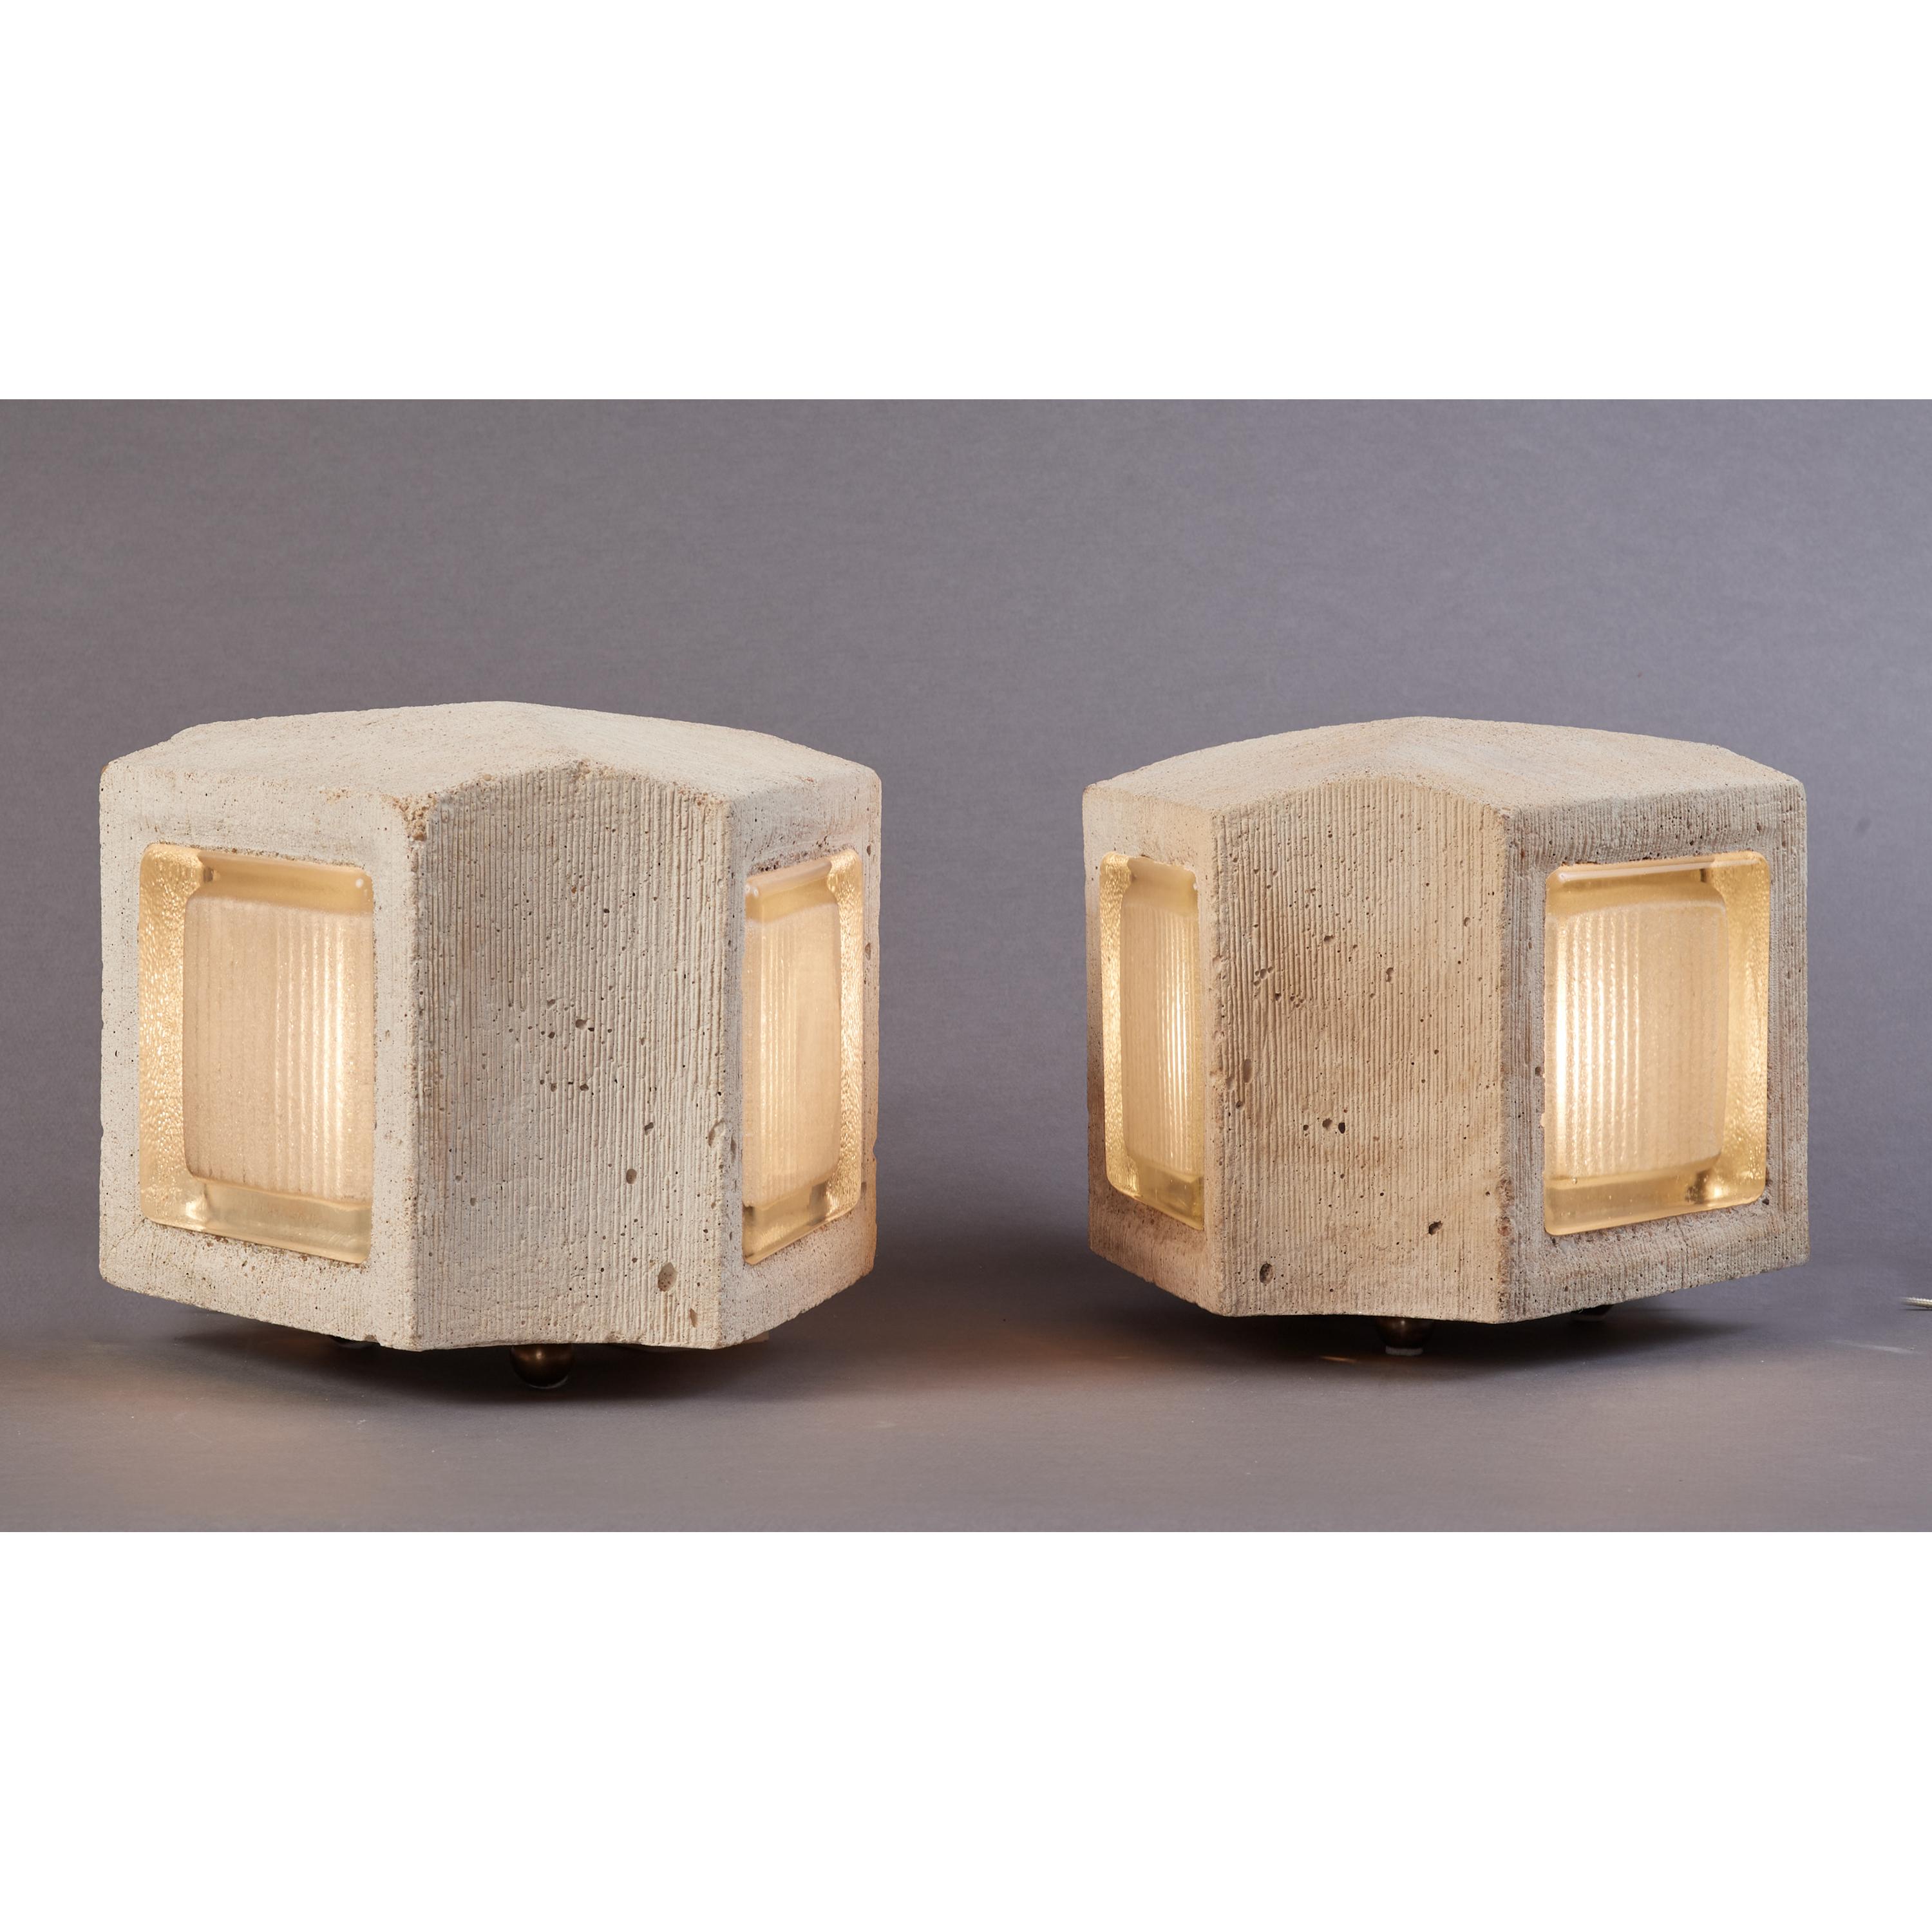 FRANCE 1970's
Wonderful pair of small concrete triangular shaped table lamps, with three slabs of glass inserted in each frame.
9 x 9 x 8 H
Rewired for use in the USA with one standard bulb